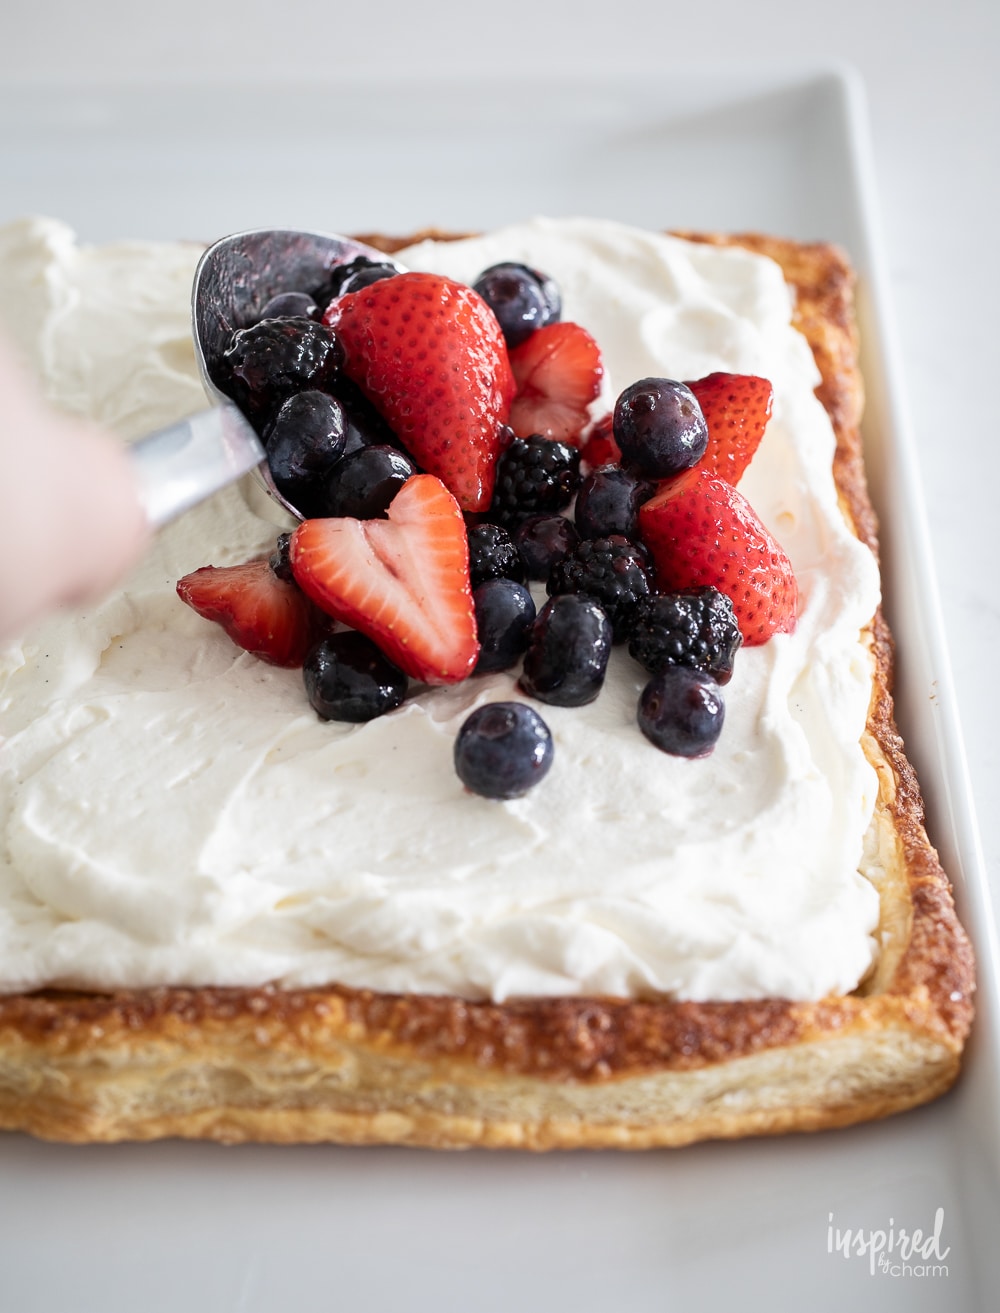 cream and fresh berries on puff pastry for fruit pizza.